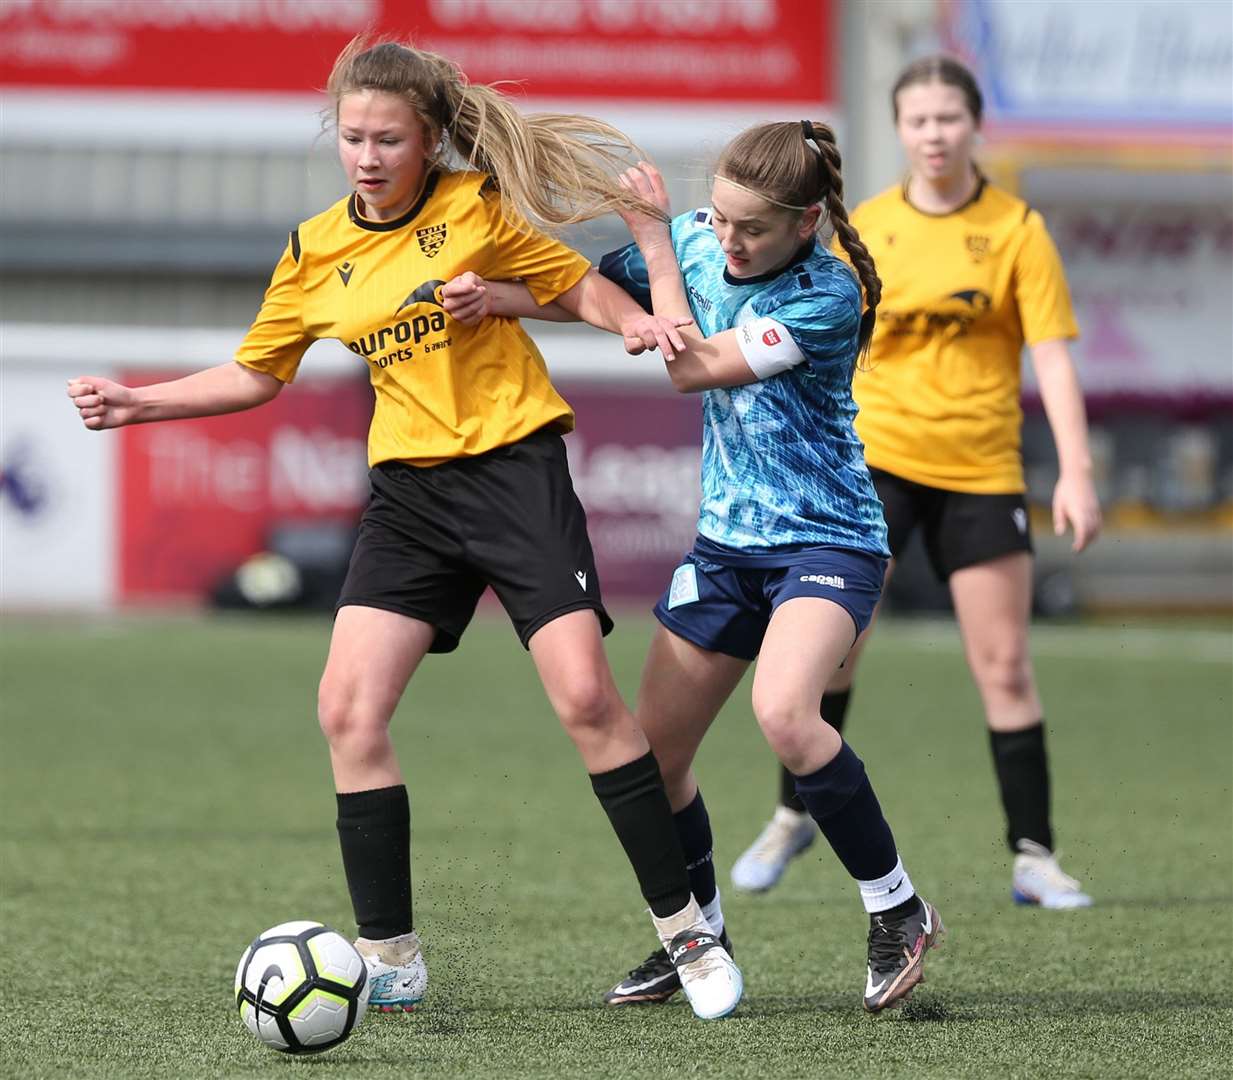 No quarter given as Maidstone United and London City Lionesses battle for possession in the Kent Merit Under-14 Girls Cup Final. Picture: PSP Images